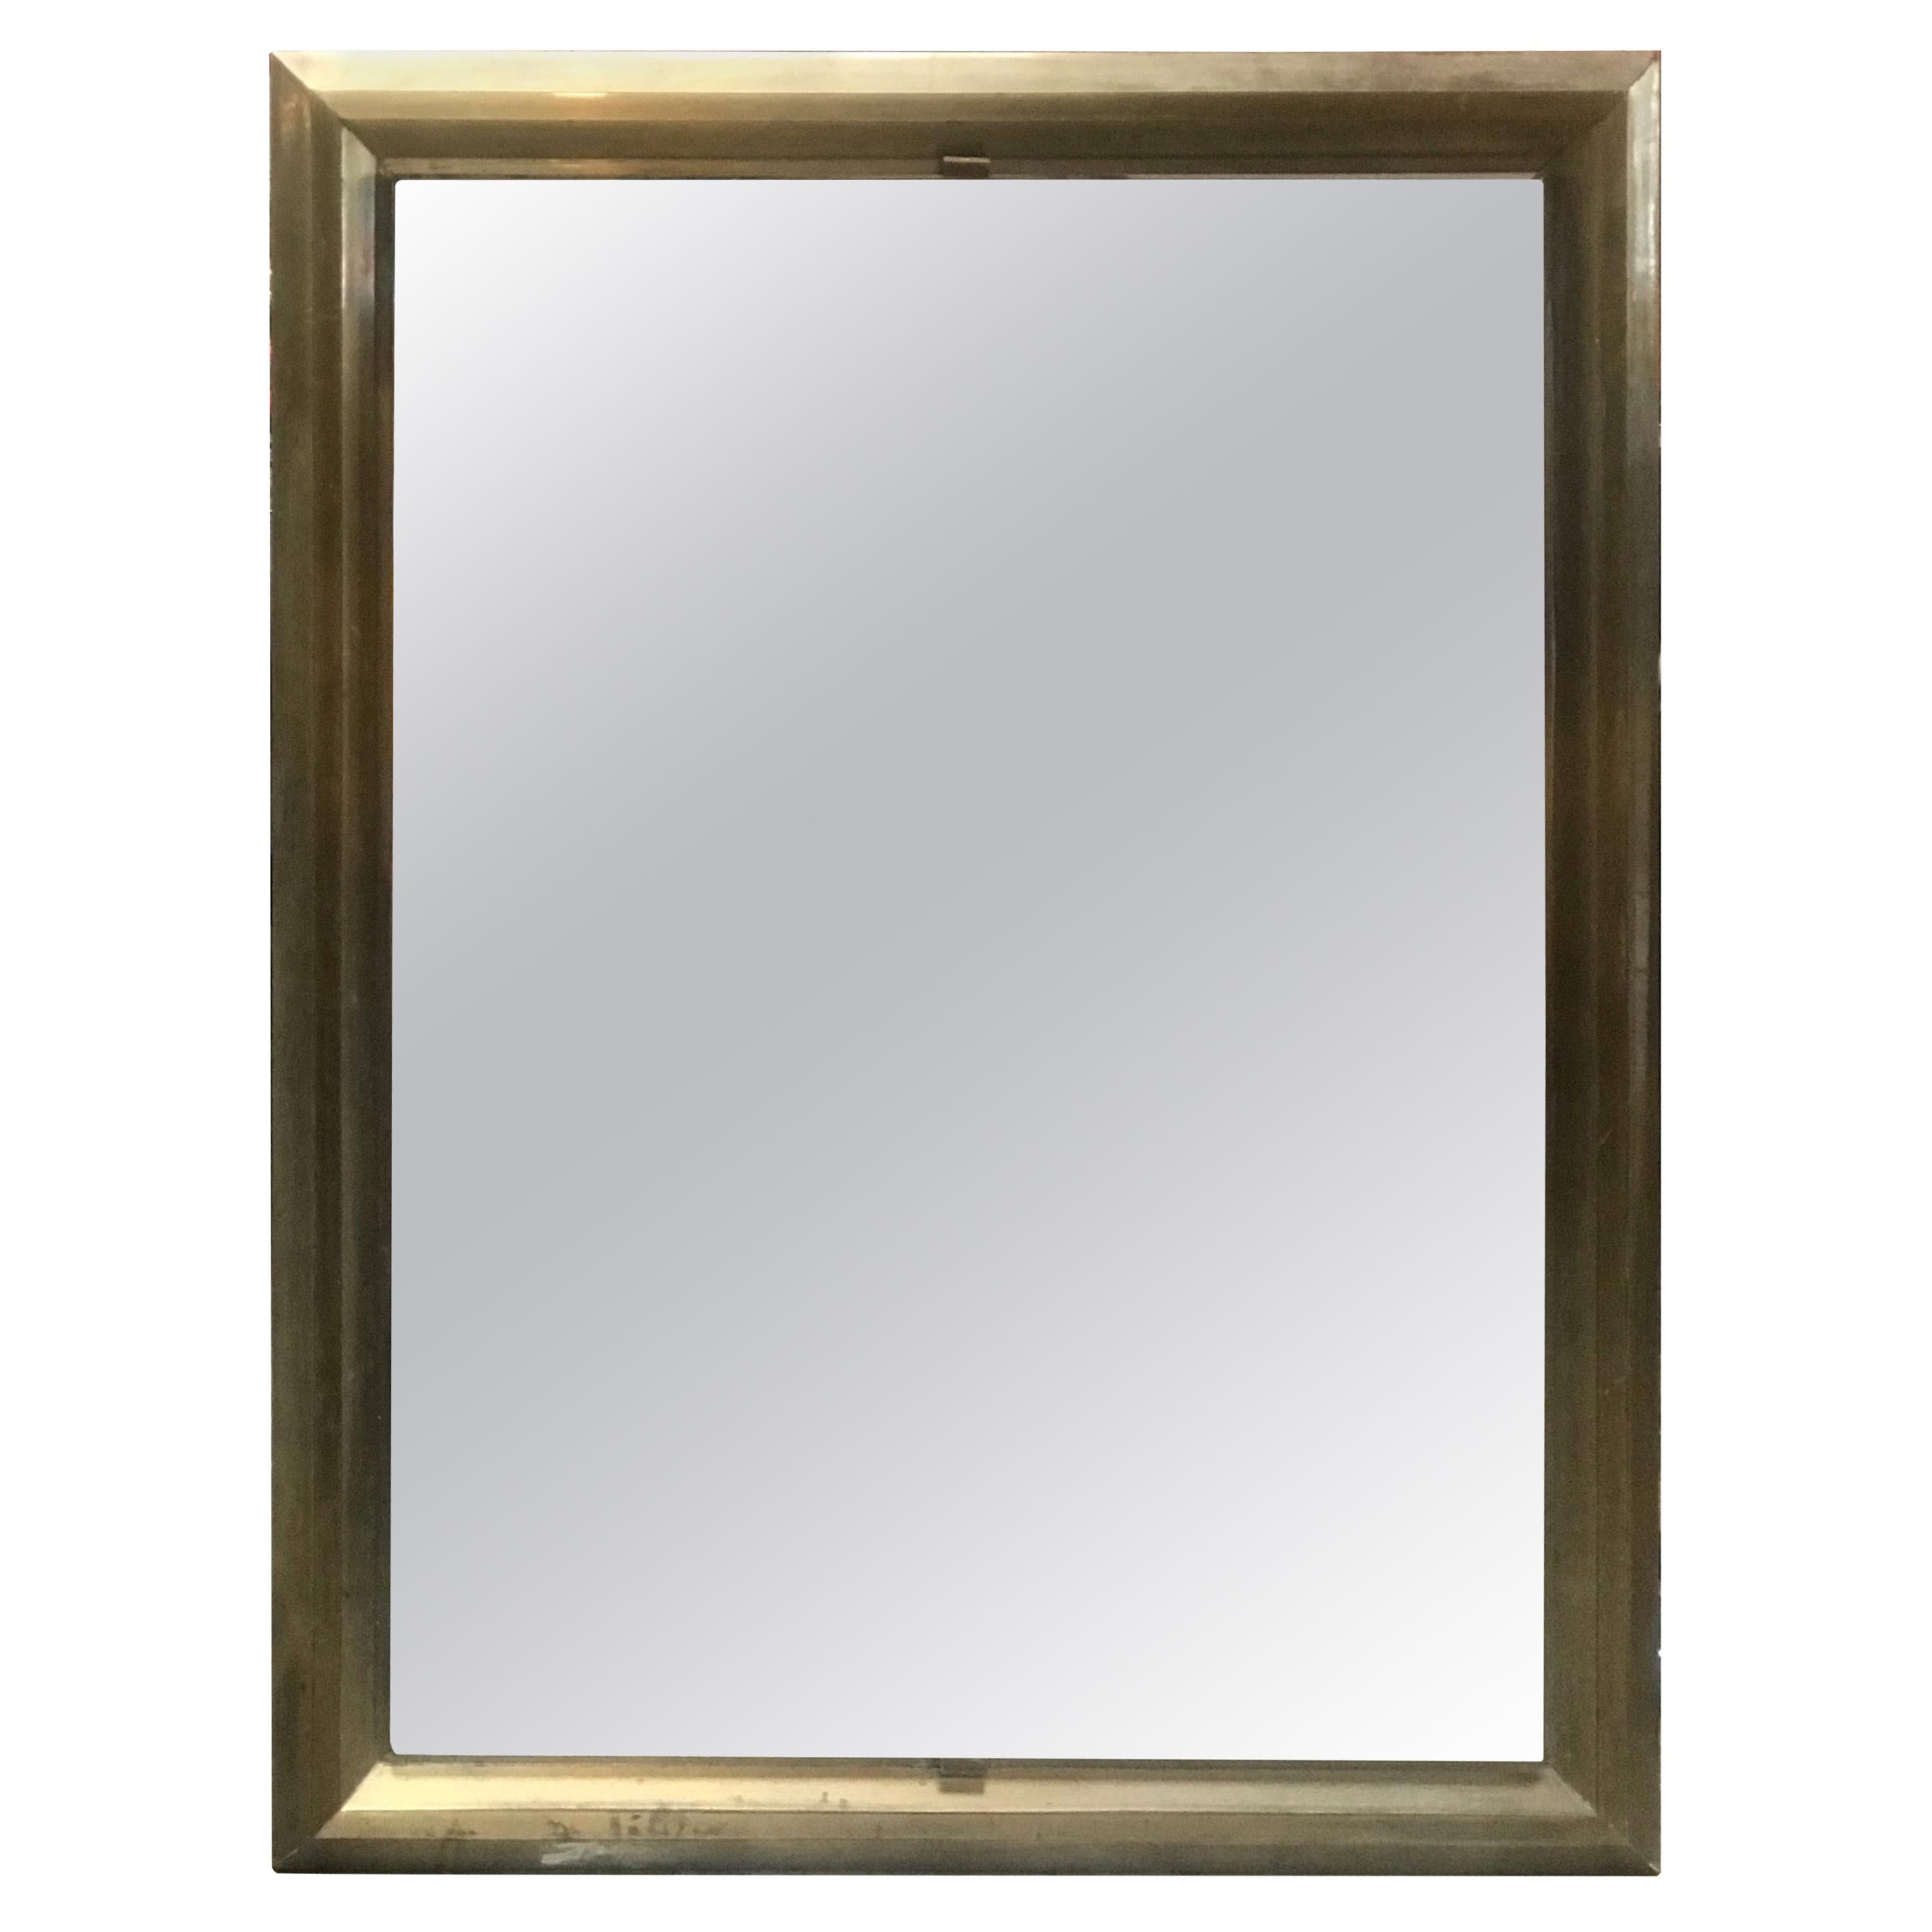 Mid-20th Century Rectangular Mirror with Brass Surround, Italy, 1950s For Sale